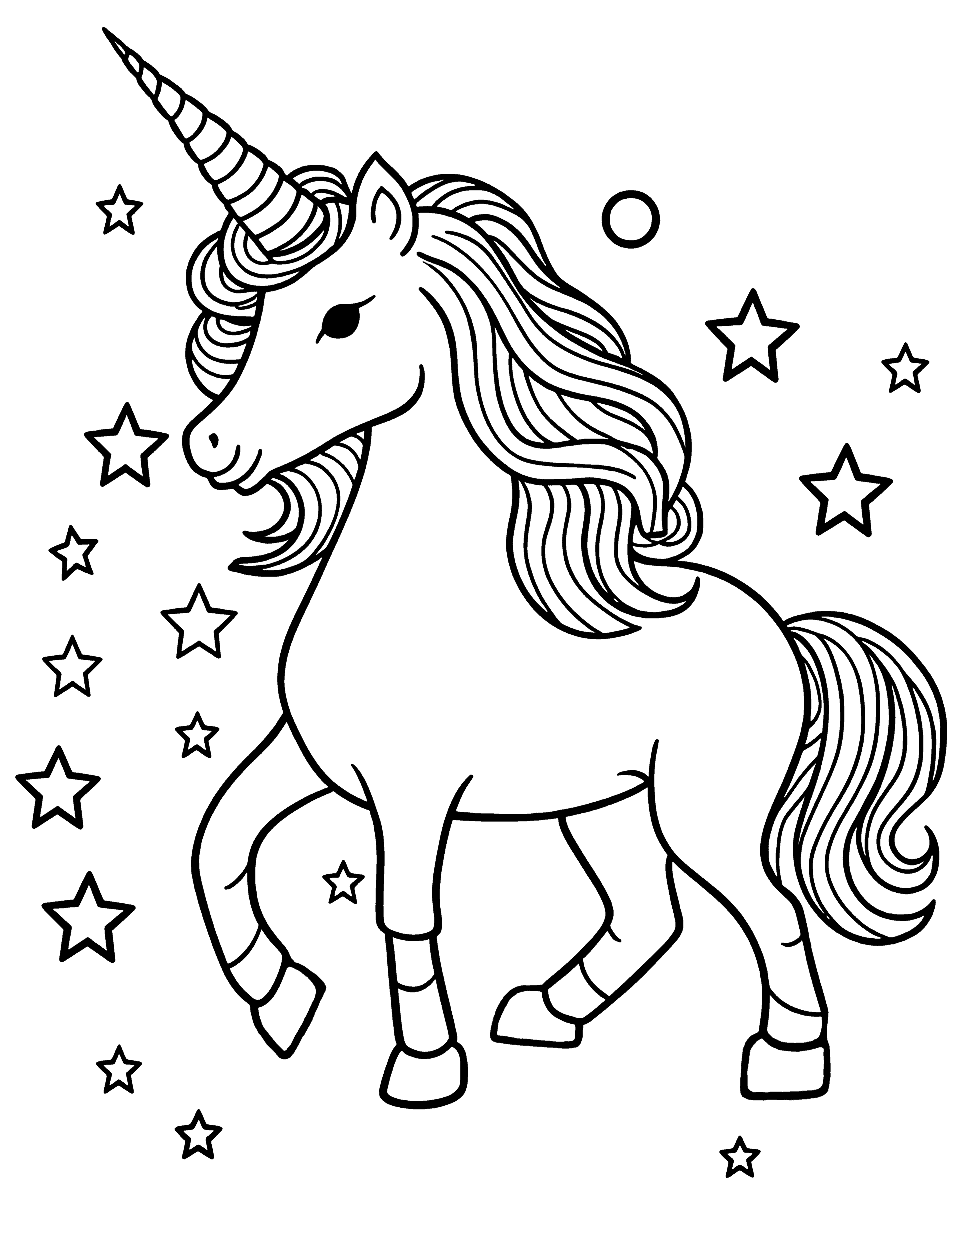 Unicorn Magic Animal Coloring Page - A magical unicorn surrounded by rainbows and stars.